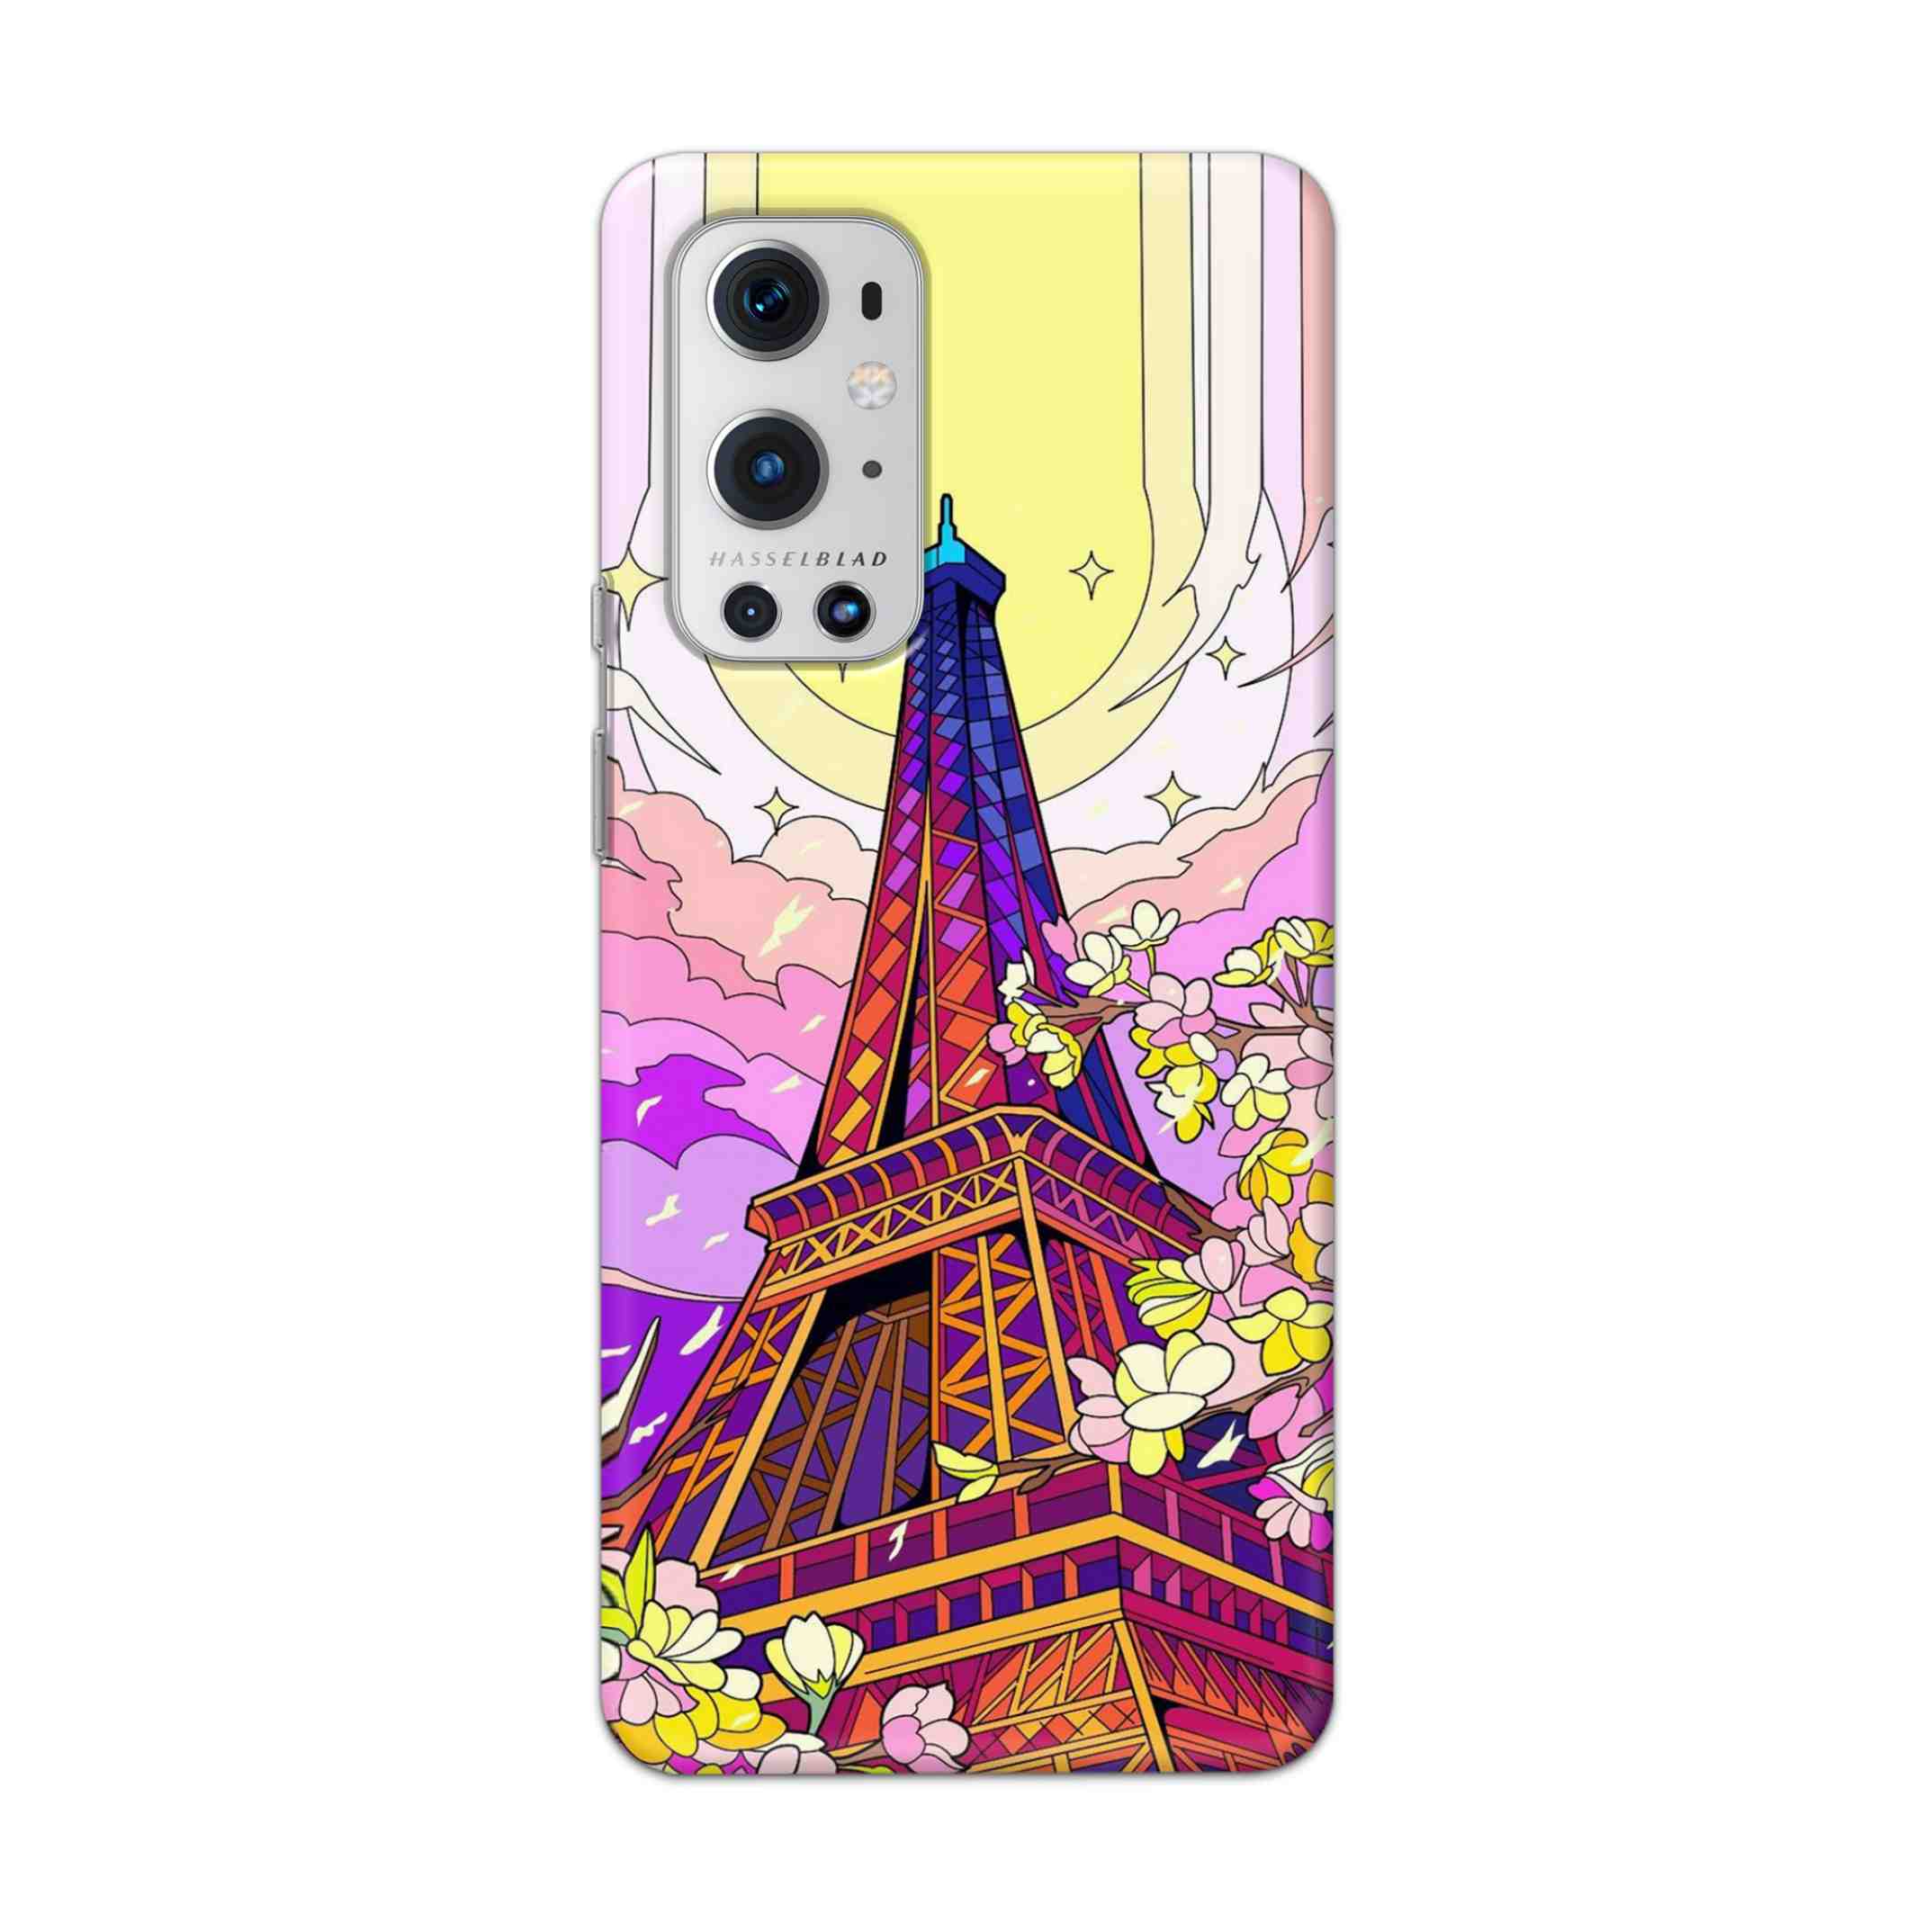 Buy Eiffel Tower Hard Back Mobile Phone Case Cover For OnePlus 9 Pro Online